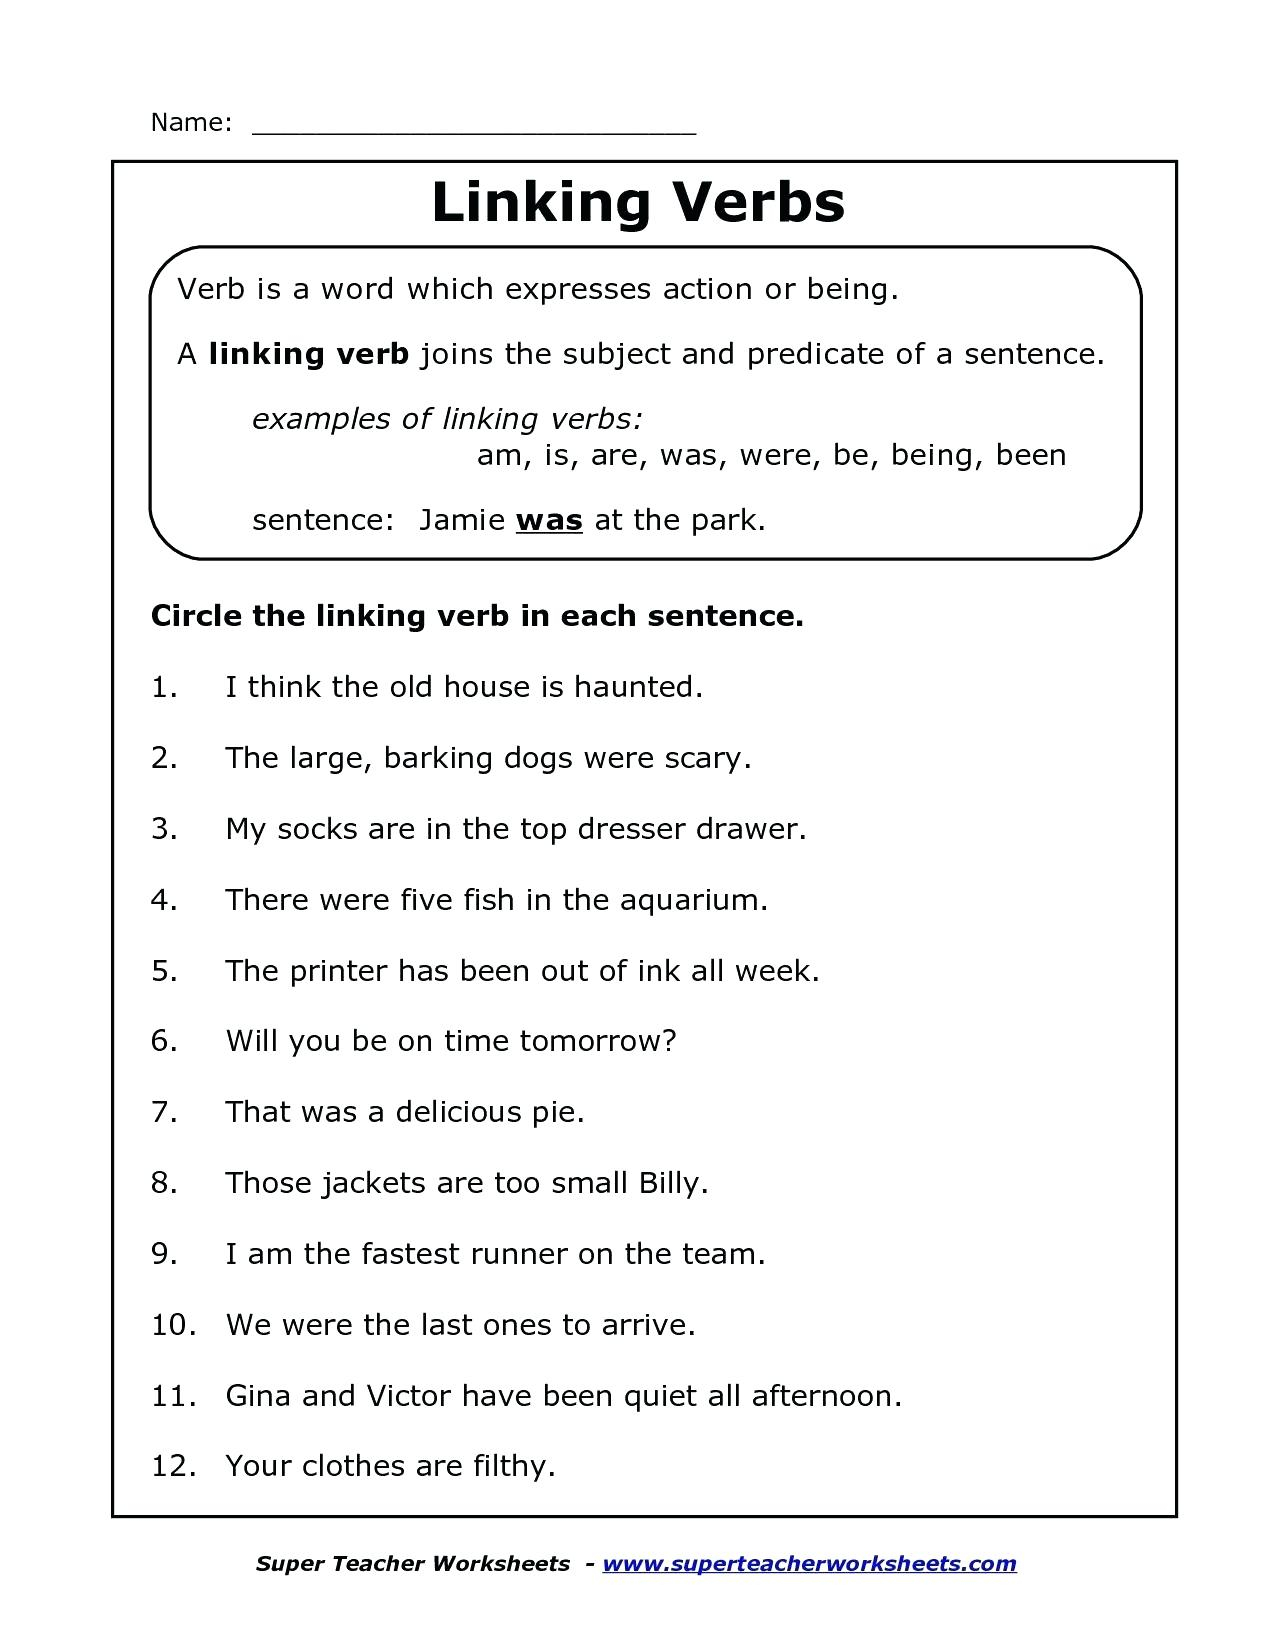 action-verbs-worksheets-for-grade-1-your-home-teacher-english